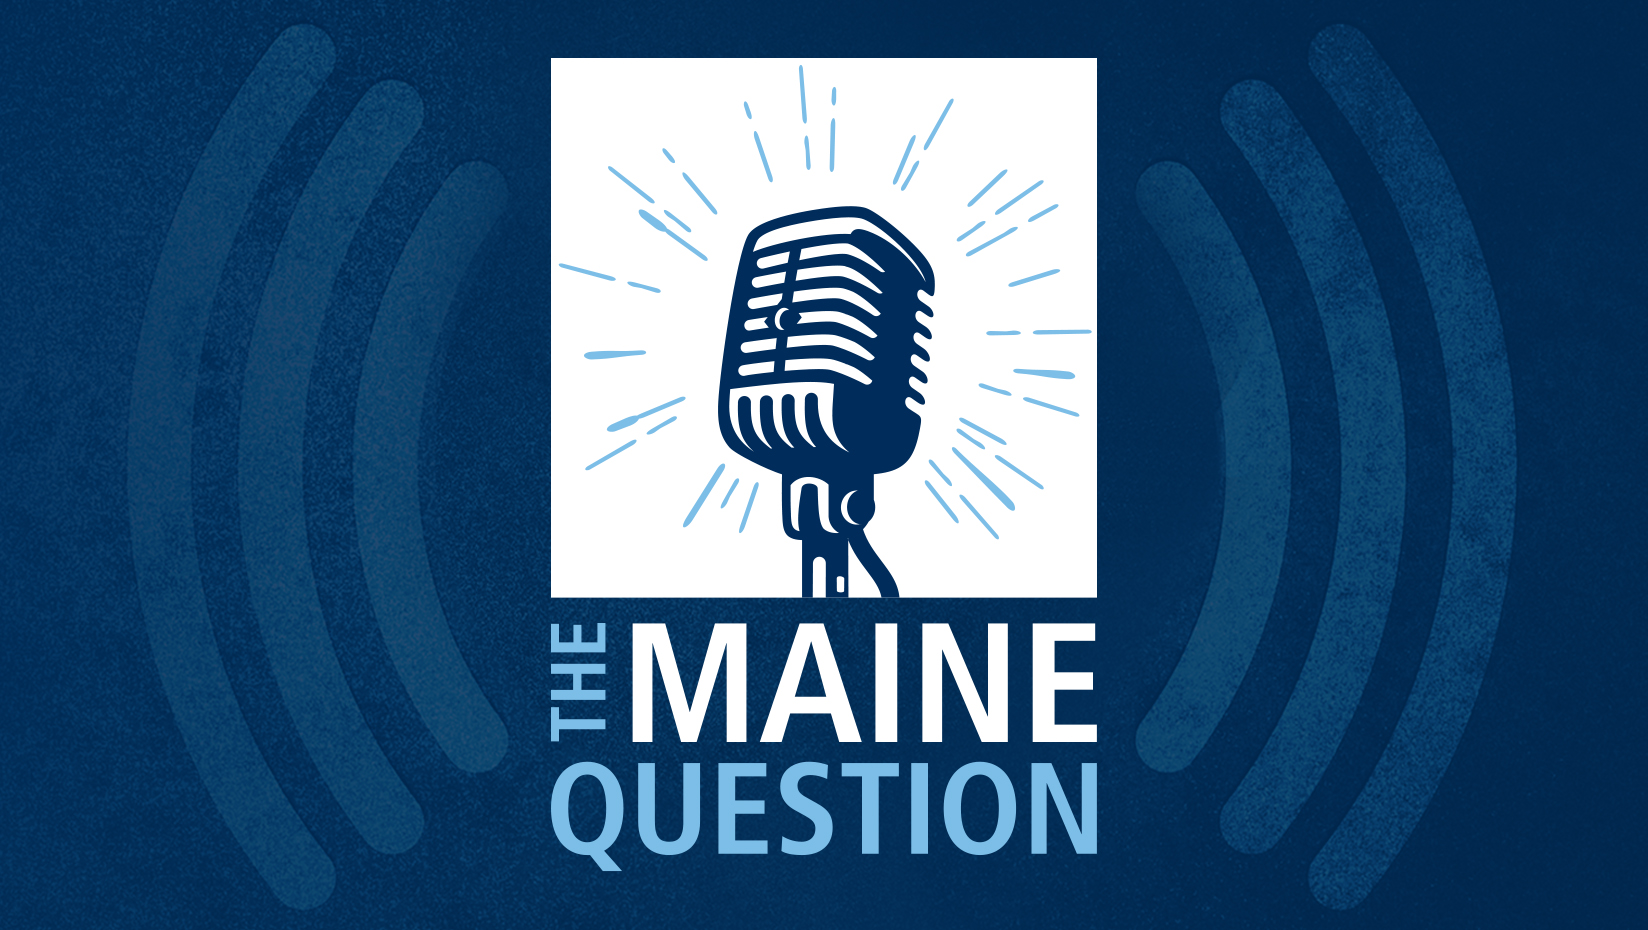 ‘The Maine Question’ probes Mayewski’s explorations, discoveries